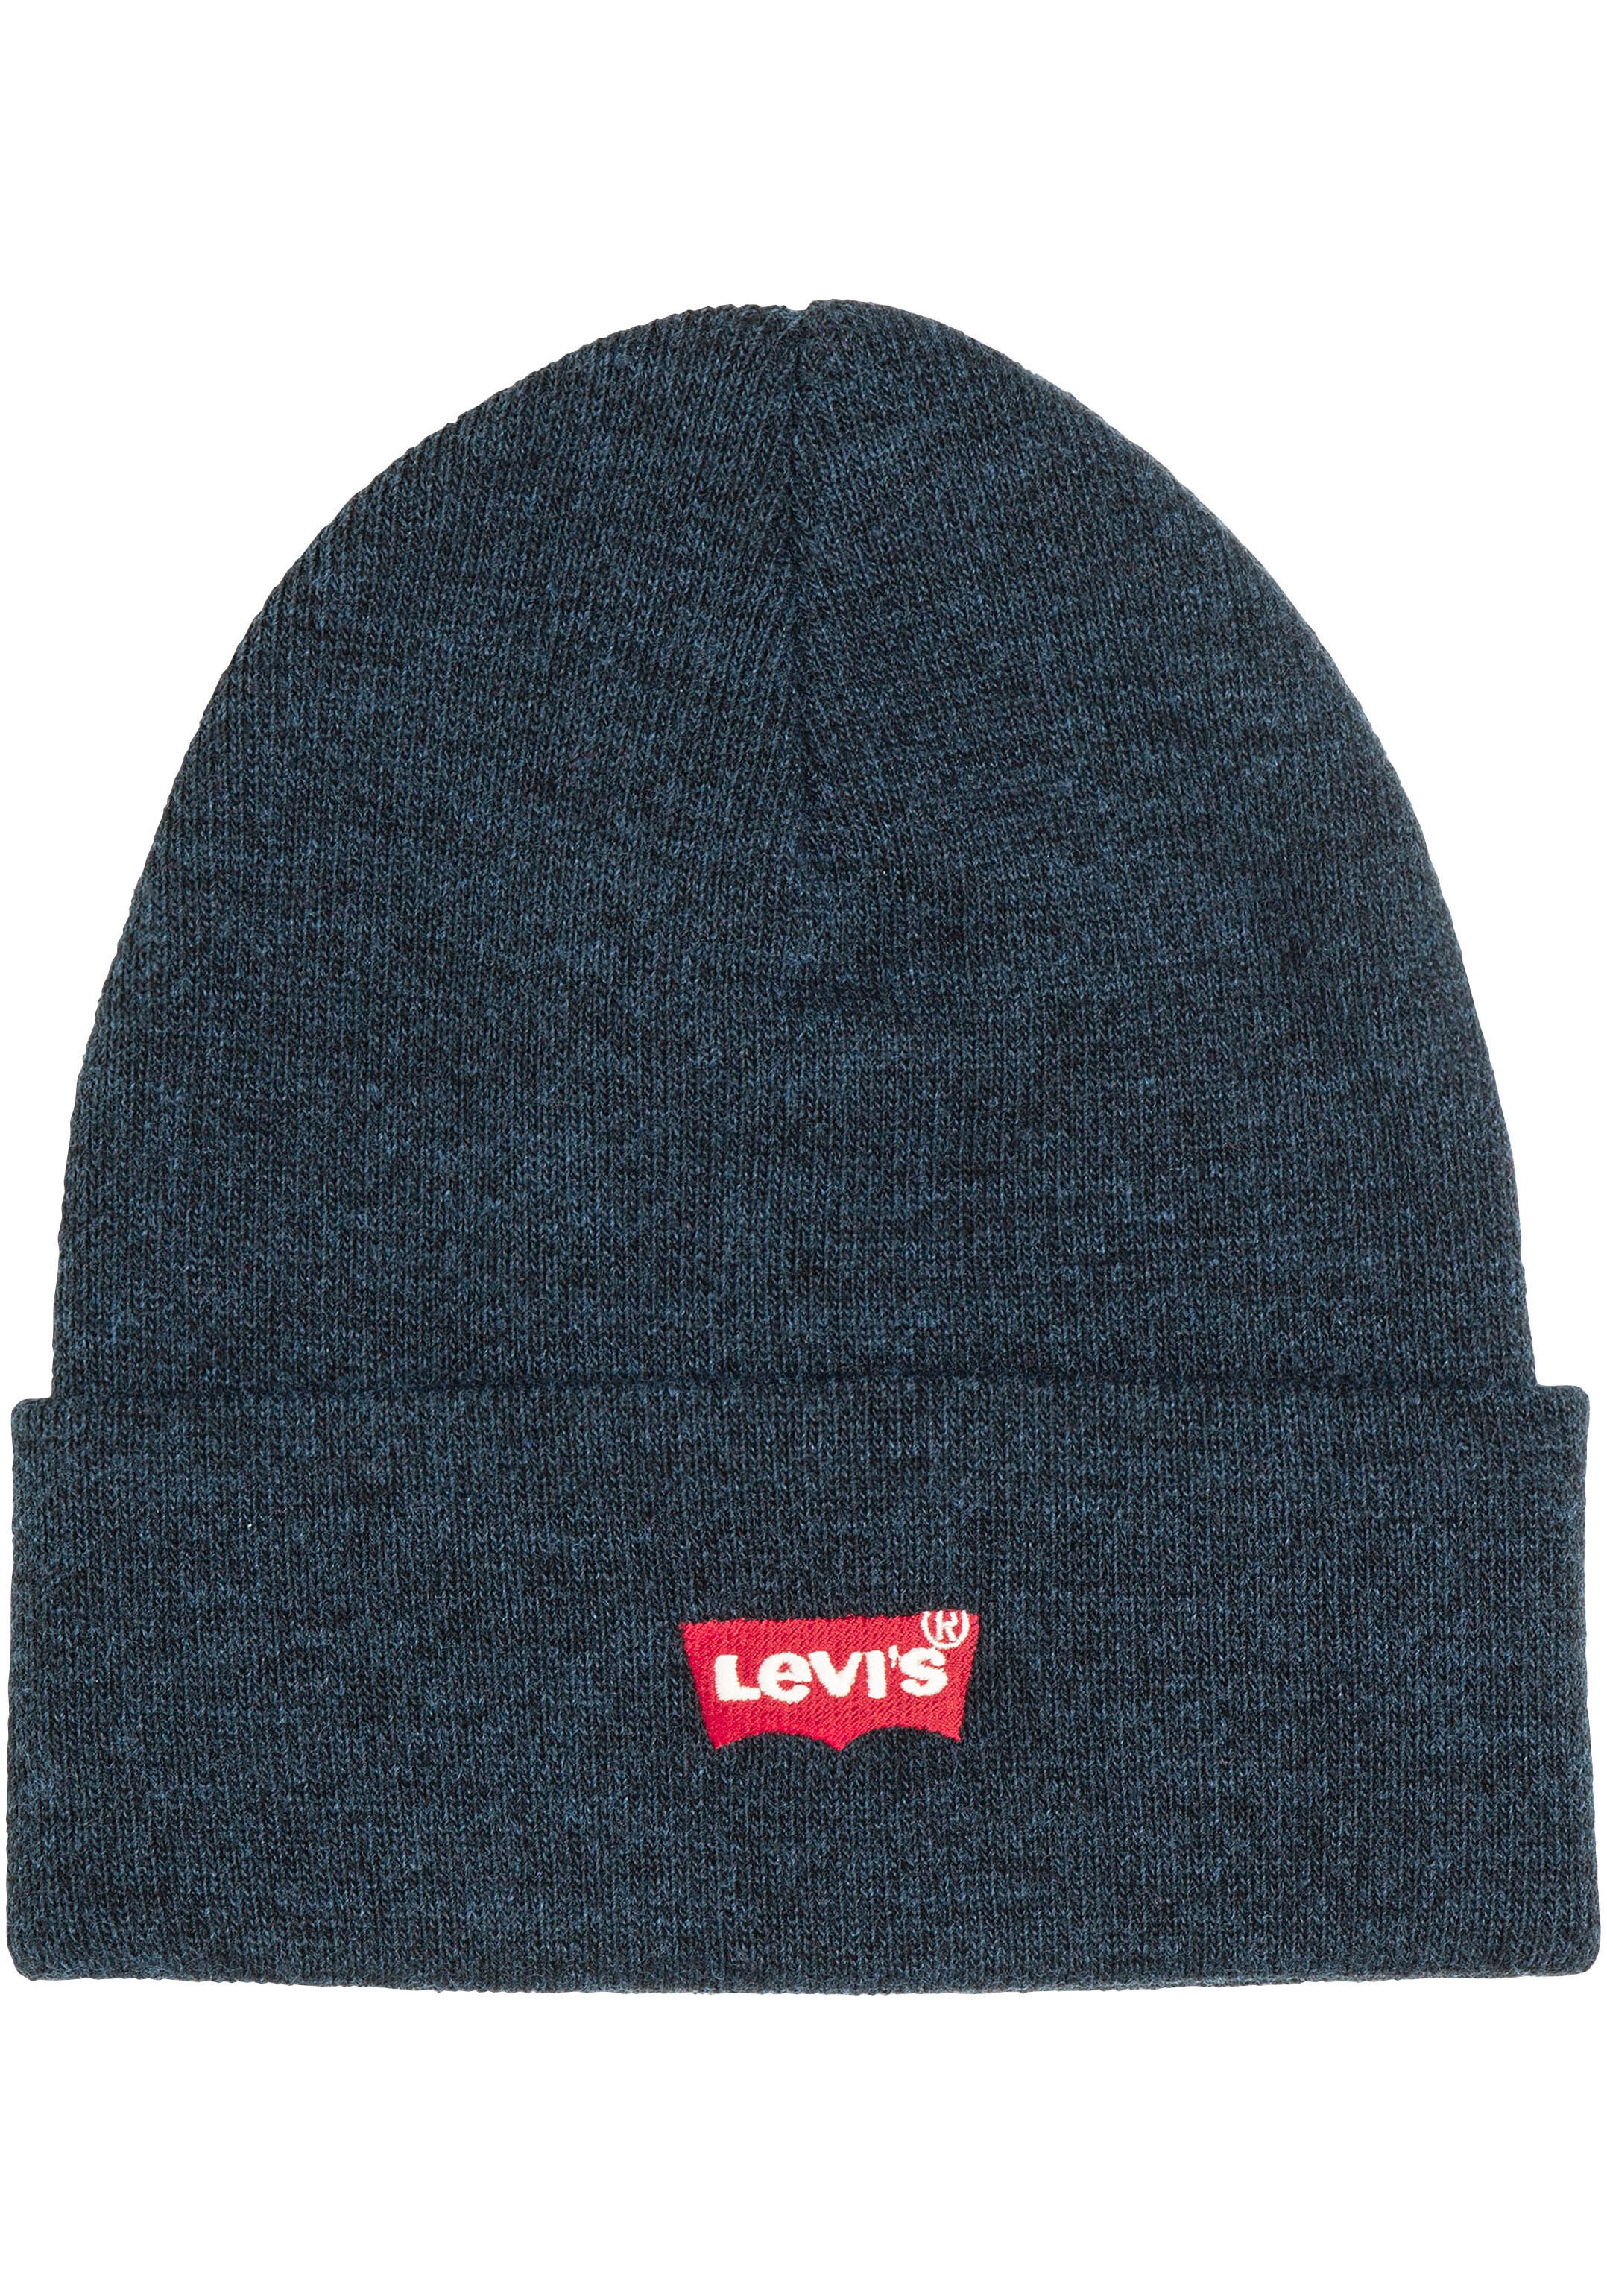 Levi's® Beanie »Beanie Red Betwing«, (1 St.)